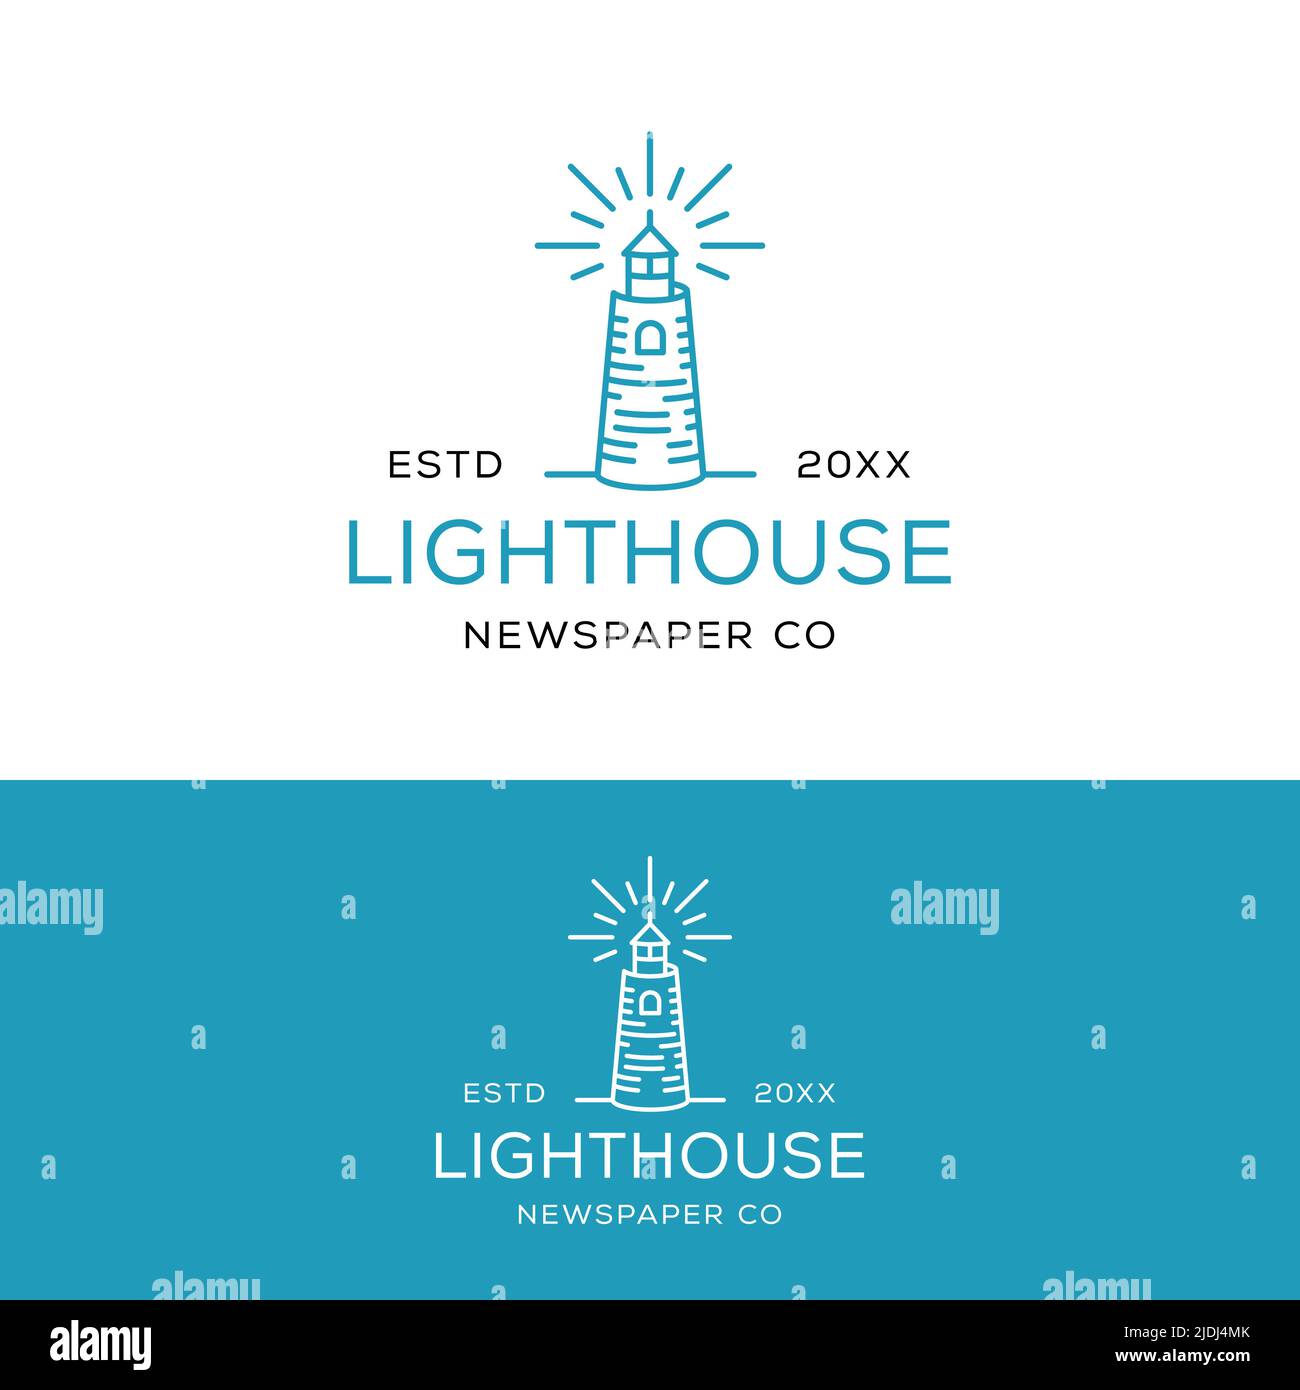 Lighthouse Paper Tower Logo Design Template. Perfect for Newspaper Companies, Magazines, Bookstores, Schools, Colleges, Book Publishers, or The City Stock Vector